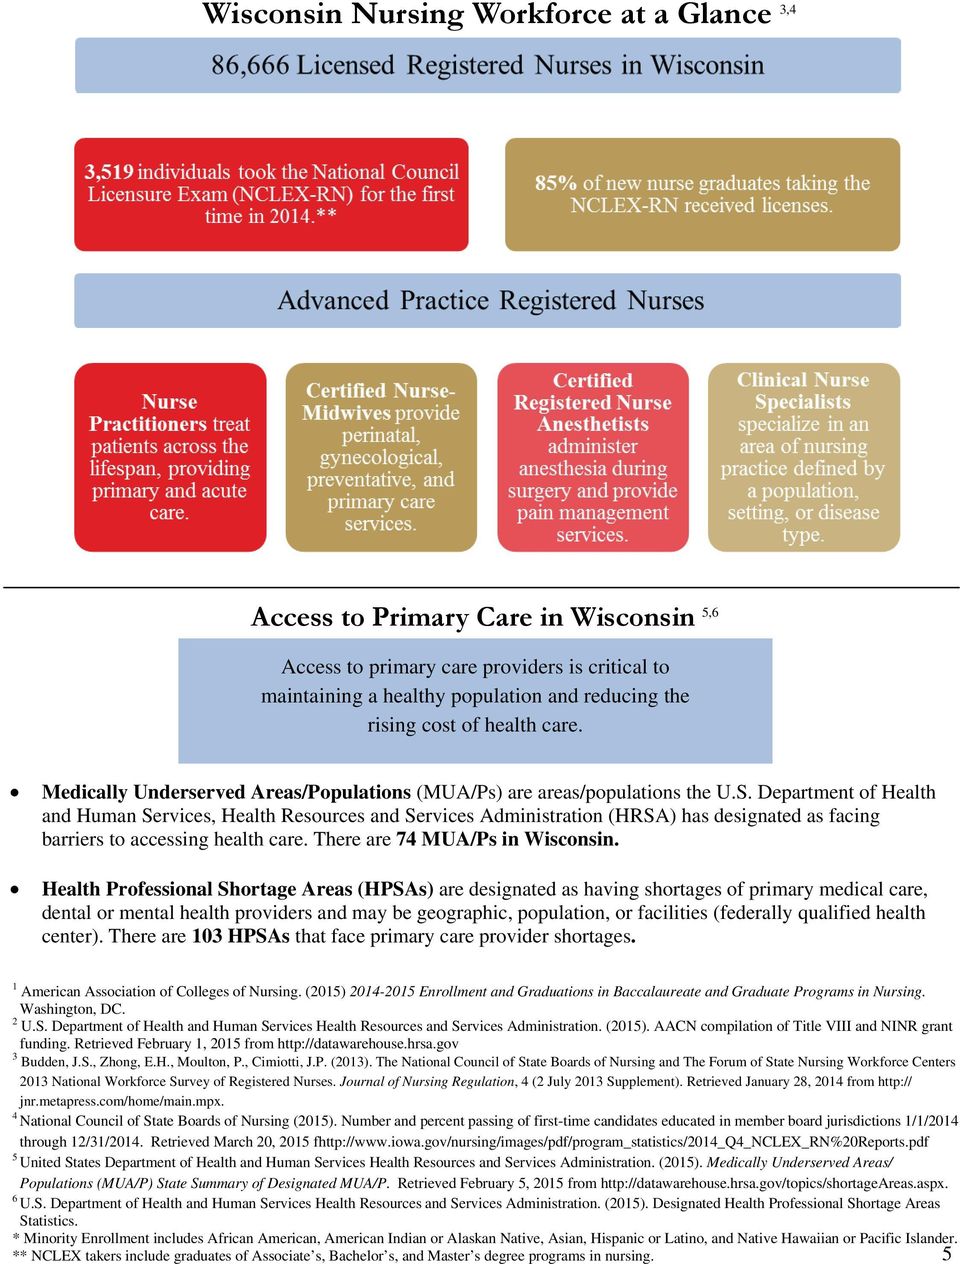 Department of Health and Human Services, Health Resources and Services Administration (HRSA) has designated as facing barriers to accessing health care. There are 74 MUA/Ps in.